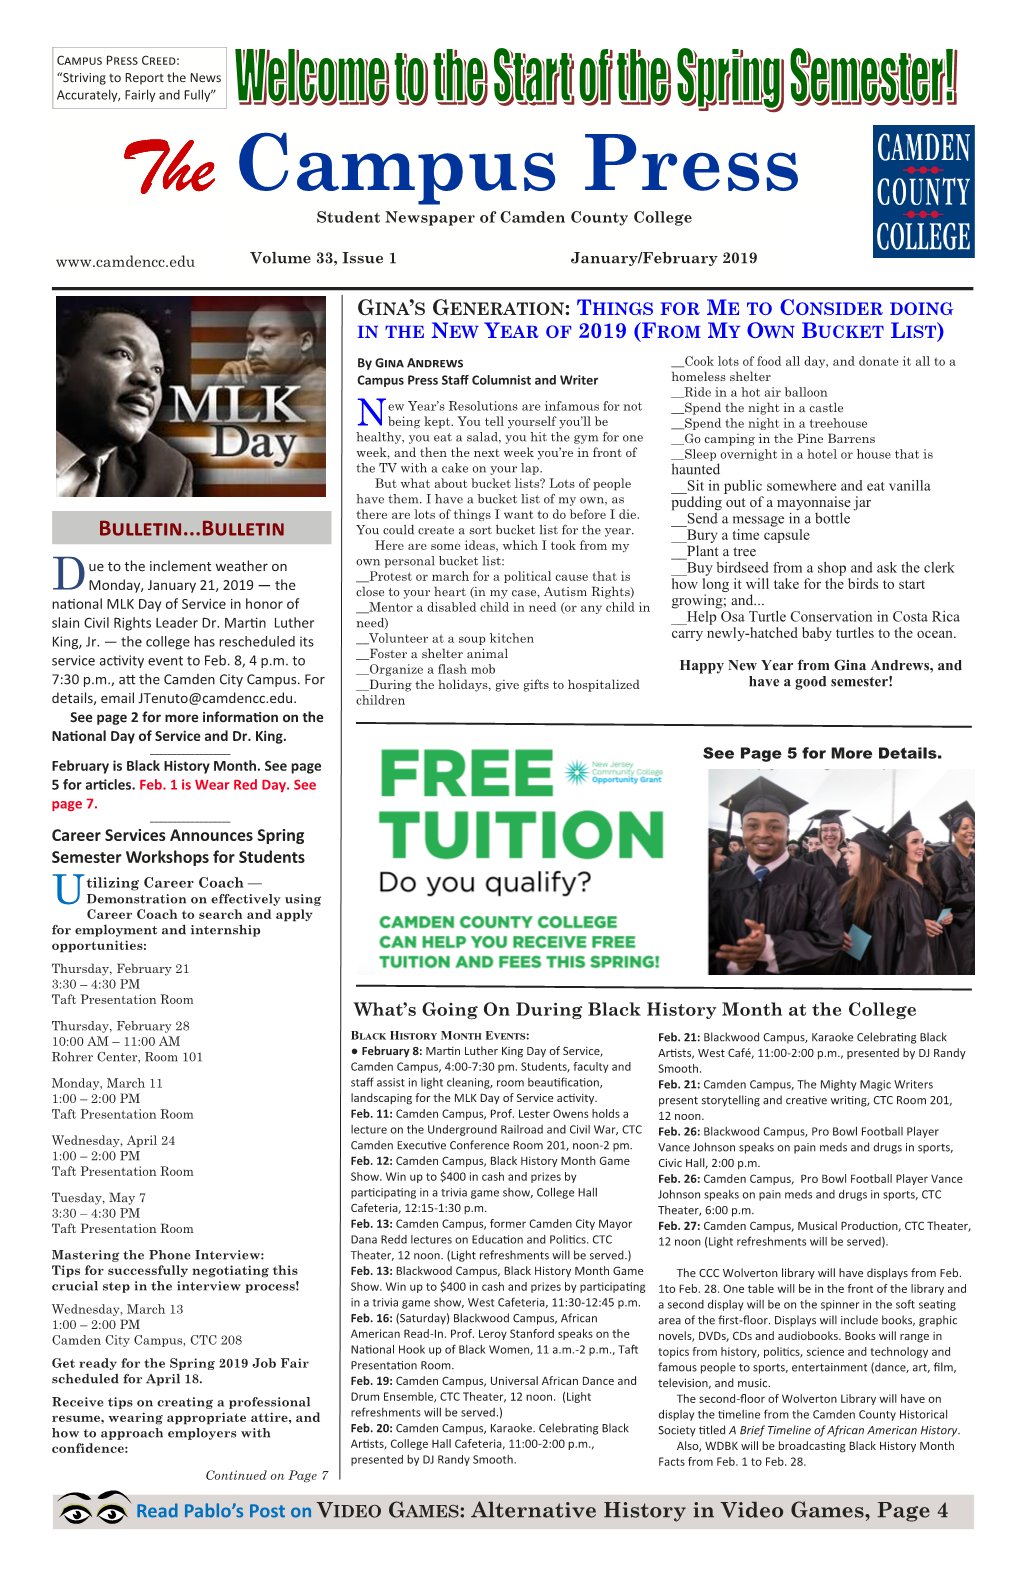 Campus Press January February 2019 Online Edition